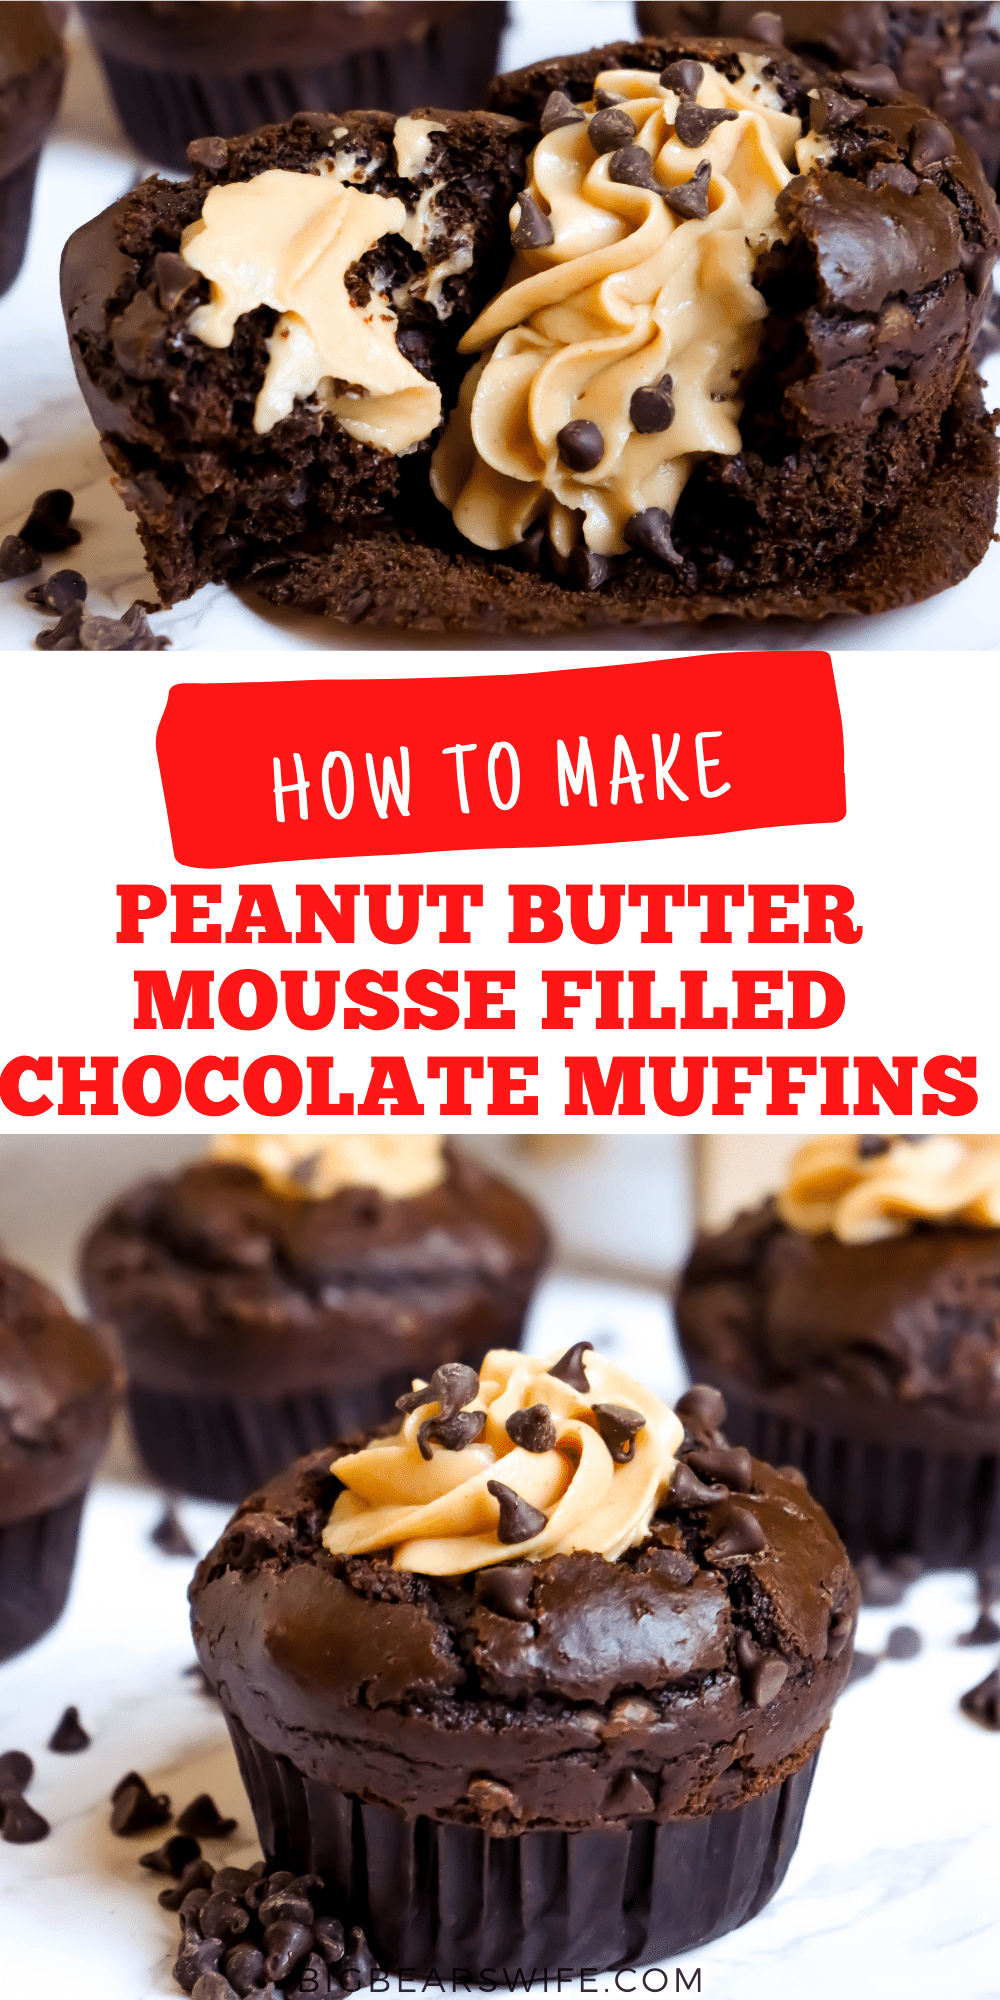 Peanut Butter Mousse filled Chocolate Muffins - Homemade chocolate muffins filled with an easy homemade peanut butter mousse are a welcome treat for breakfast, brunch, and (if you are lucky enough to have any leftover) dessert. via @bigbearswife